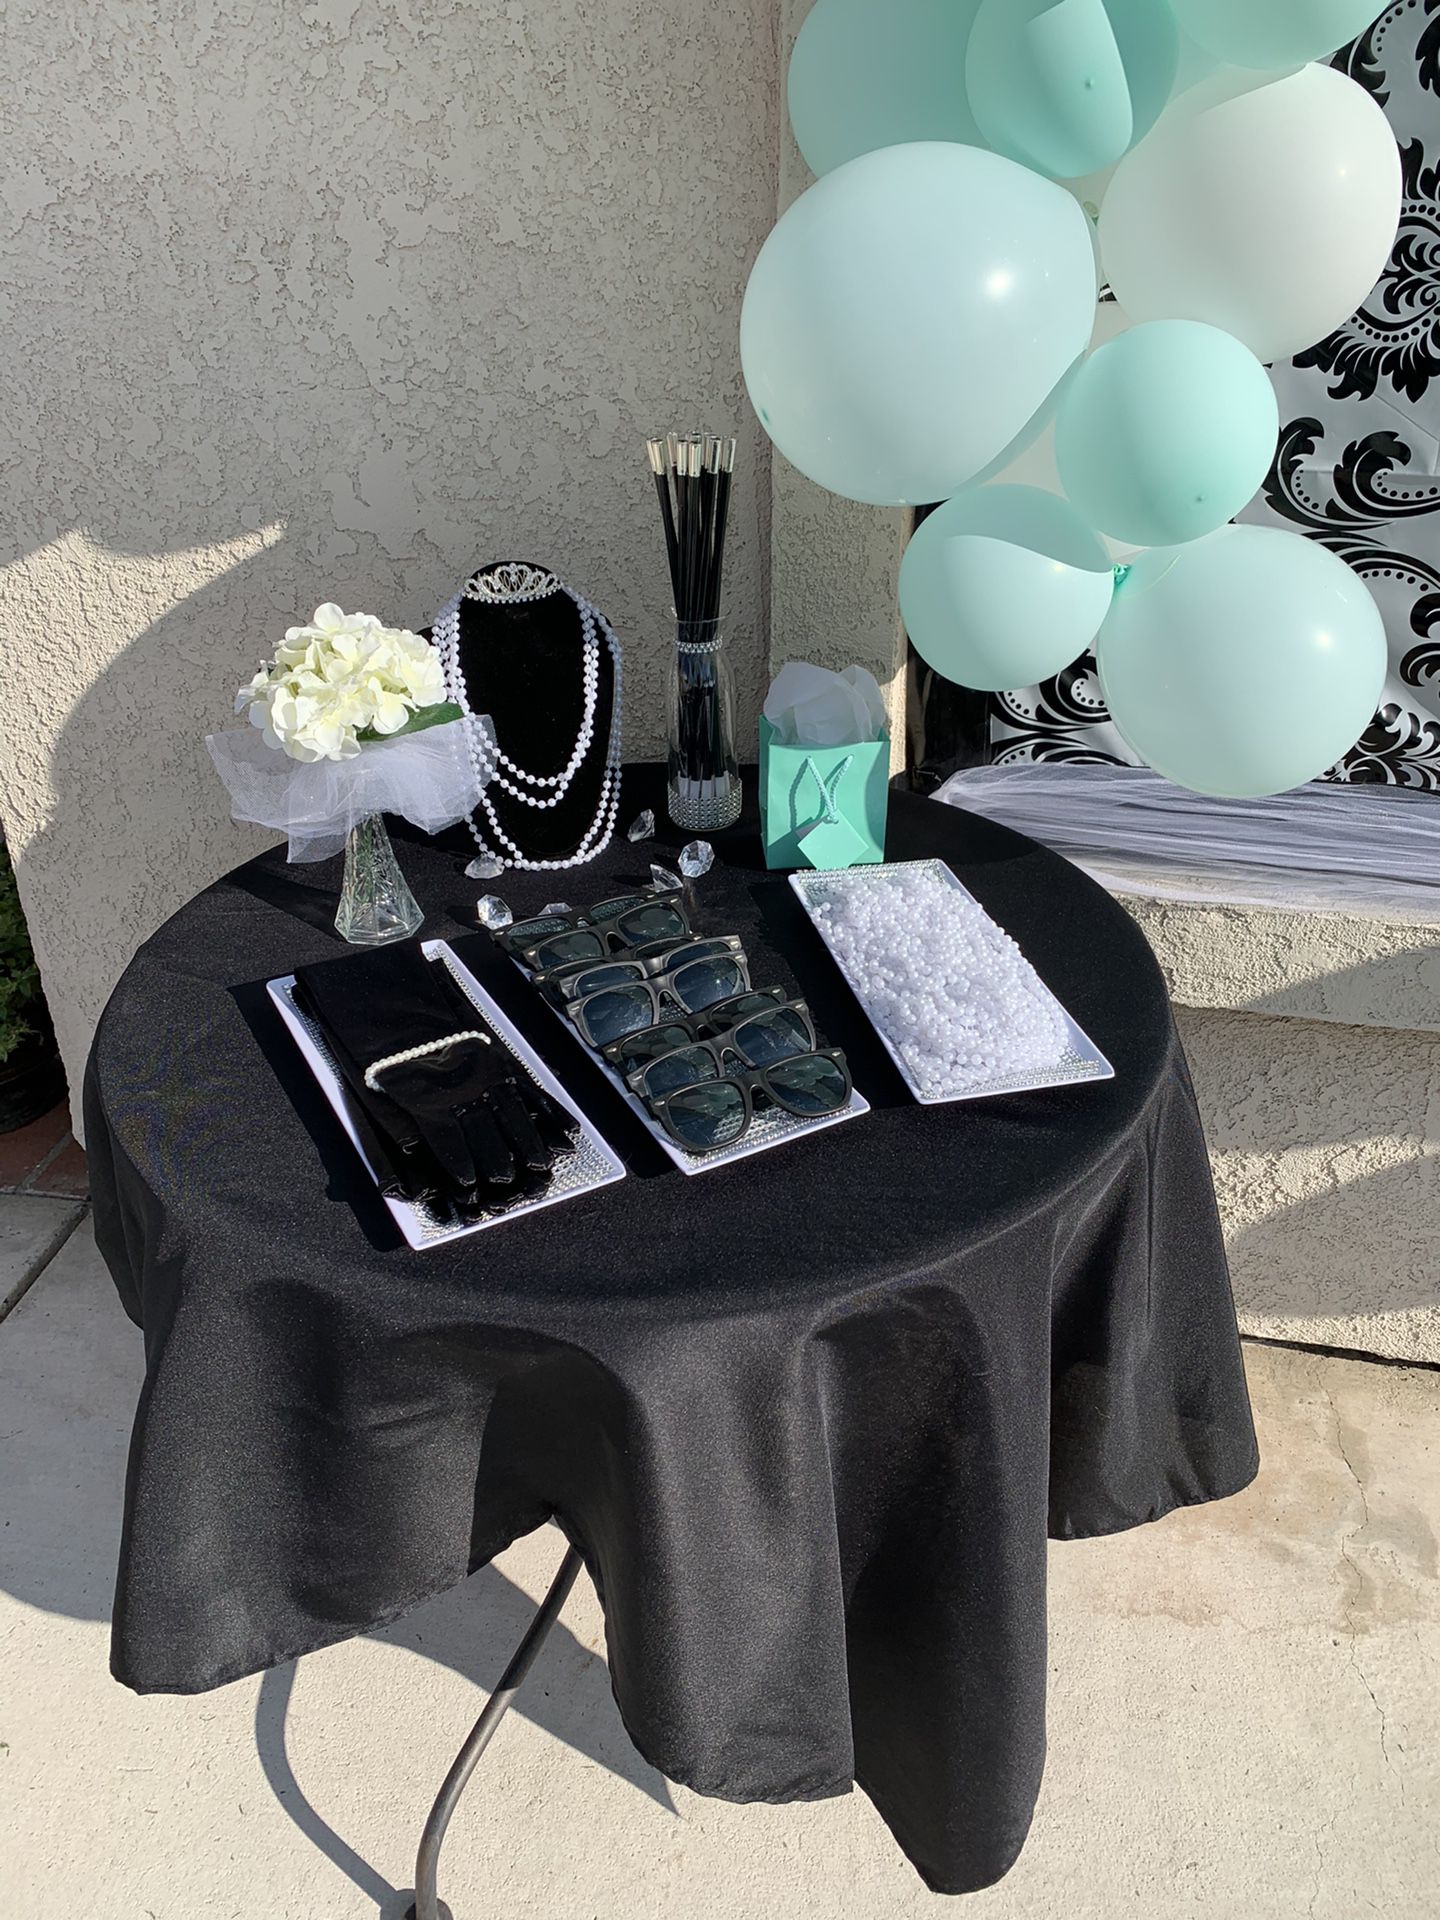 Breakfast At Tiffany’s bridal Shower Party Supplies And Games